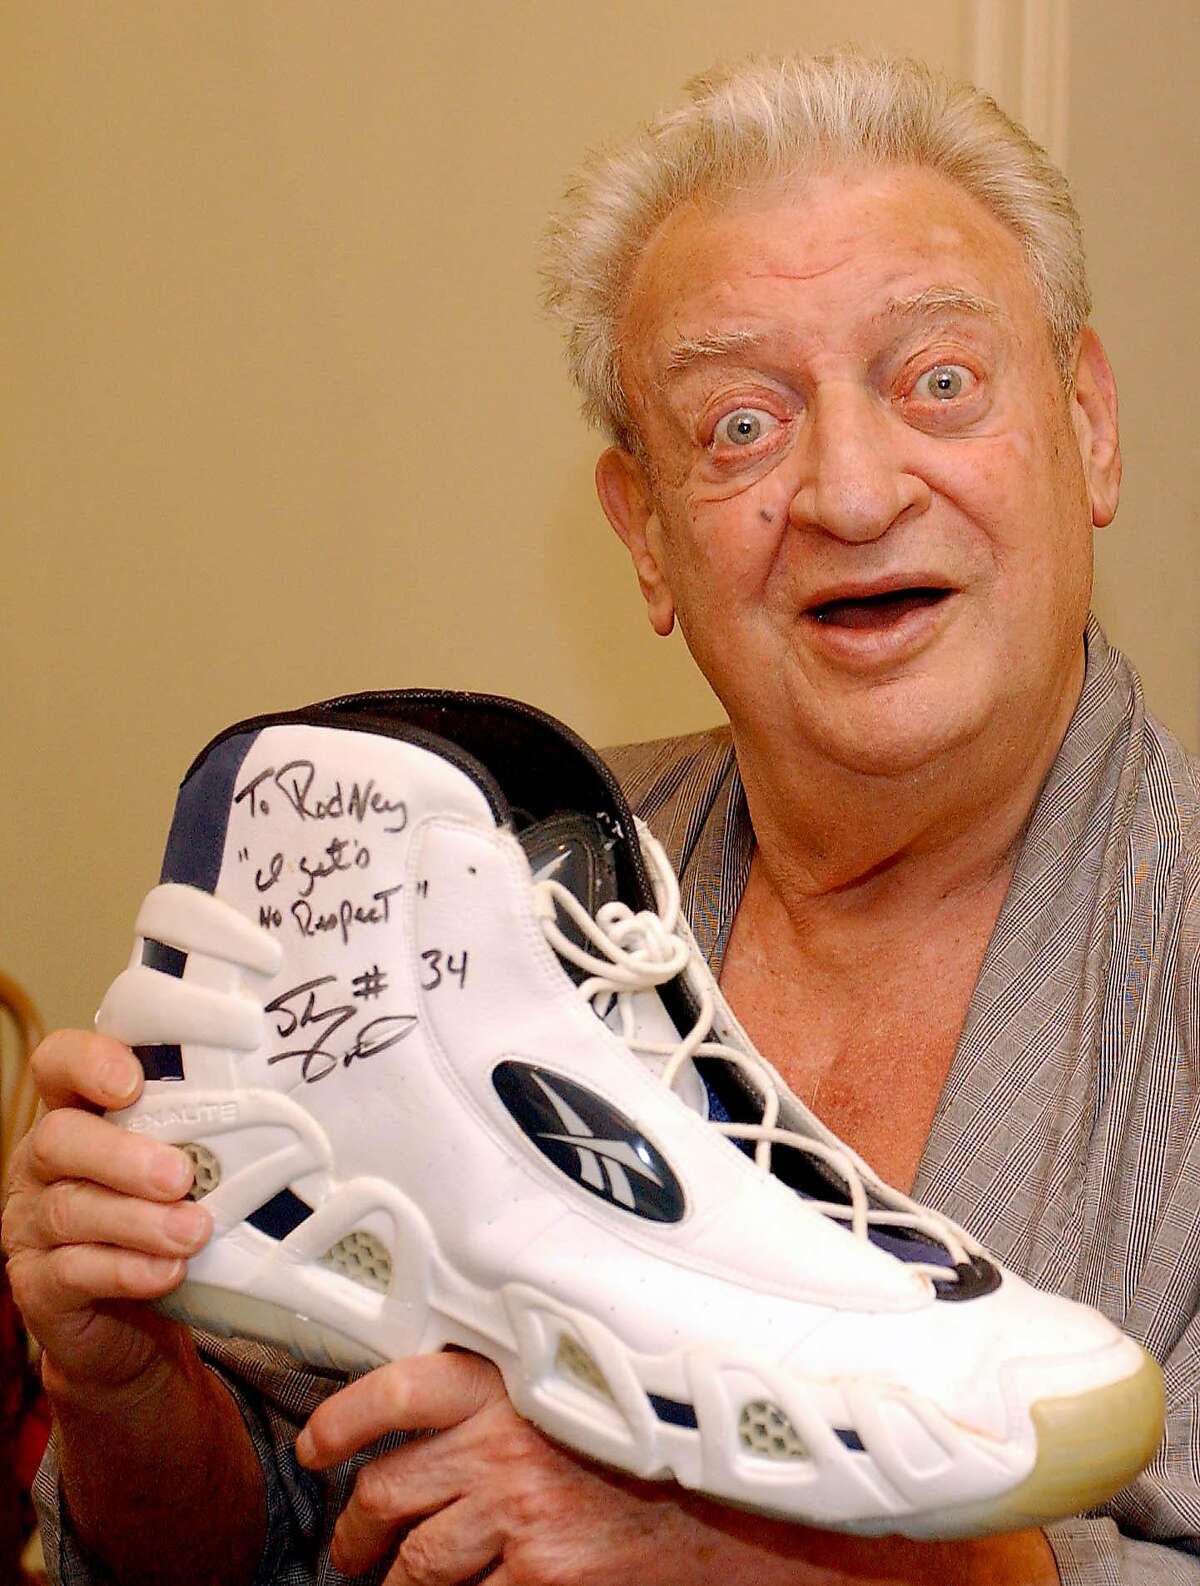 ** FILE ** Comedian Rodney Dangerfield holds up a shoe autographed by Shaquille O'Neal that says "To Rodney, 'I gets No Respect' Shaq #34," at his home in Los Angeles during a photo session for the Orlando Sentinel football preview section, as shown in this July 28, 2004, file photo. On Tuesday, Oct. 5, 2004, Dangerfield died. He was 82. (AP Photo/Orlando Sentinel, John Raoux)